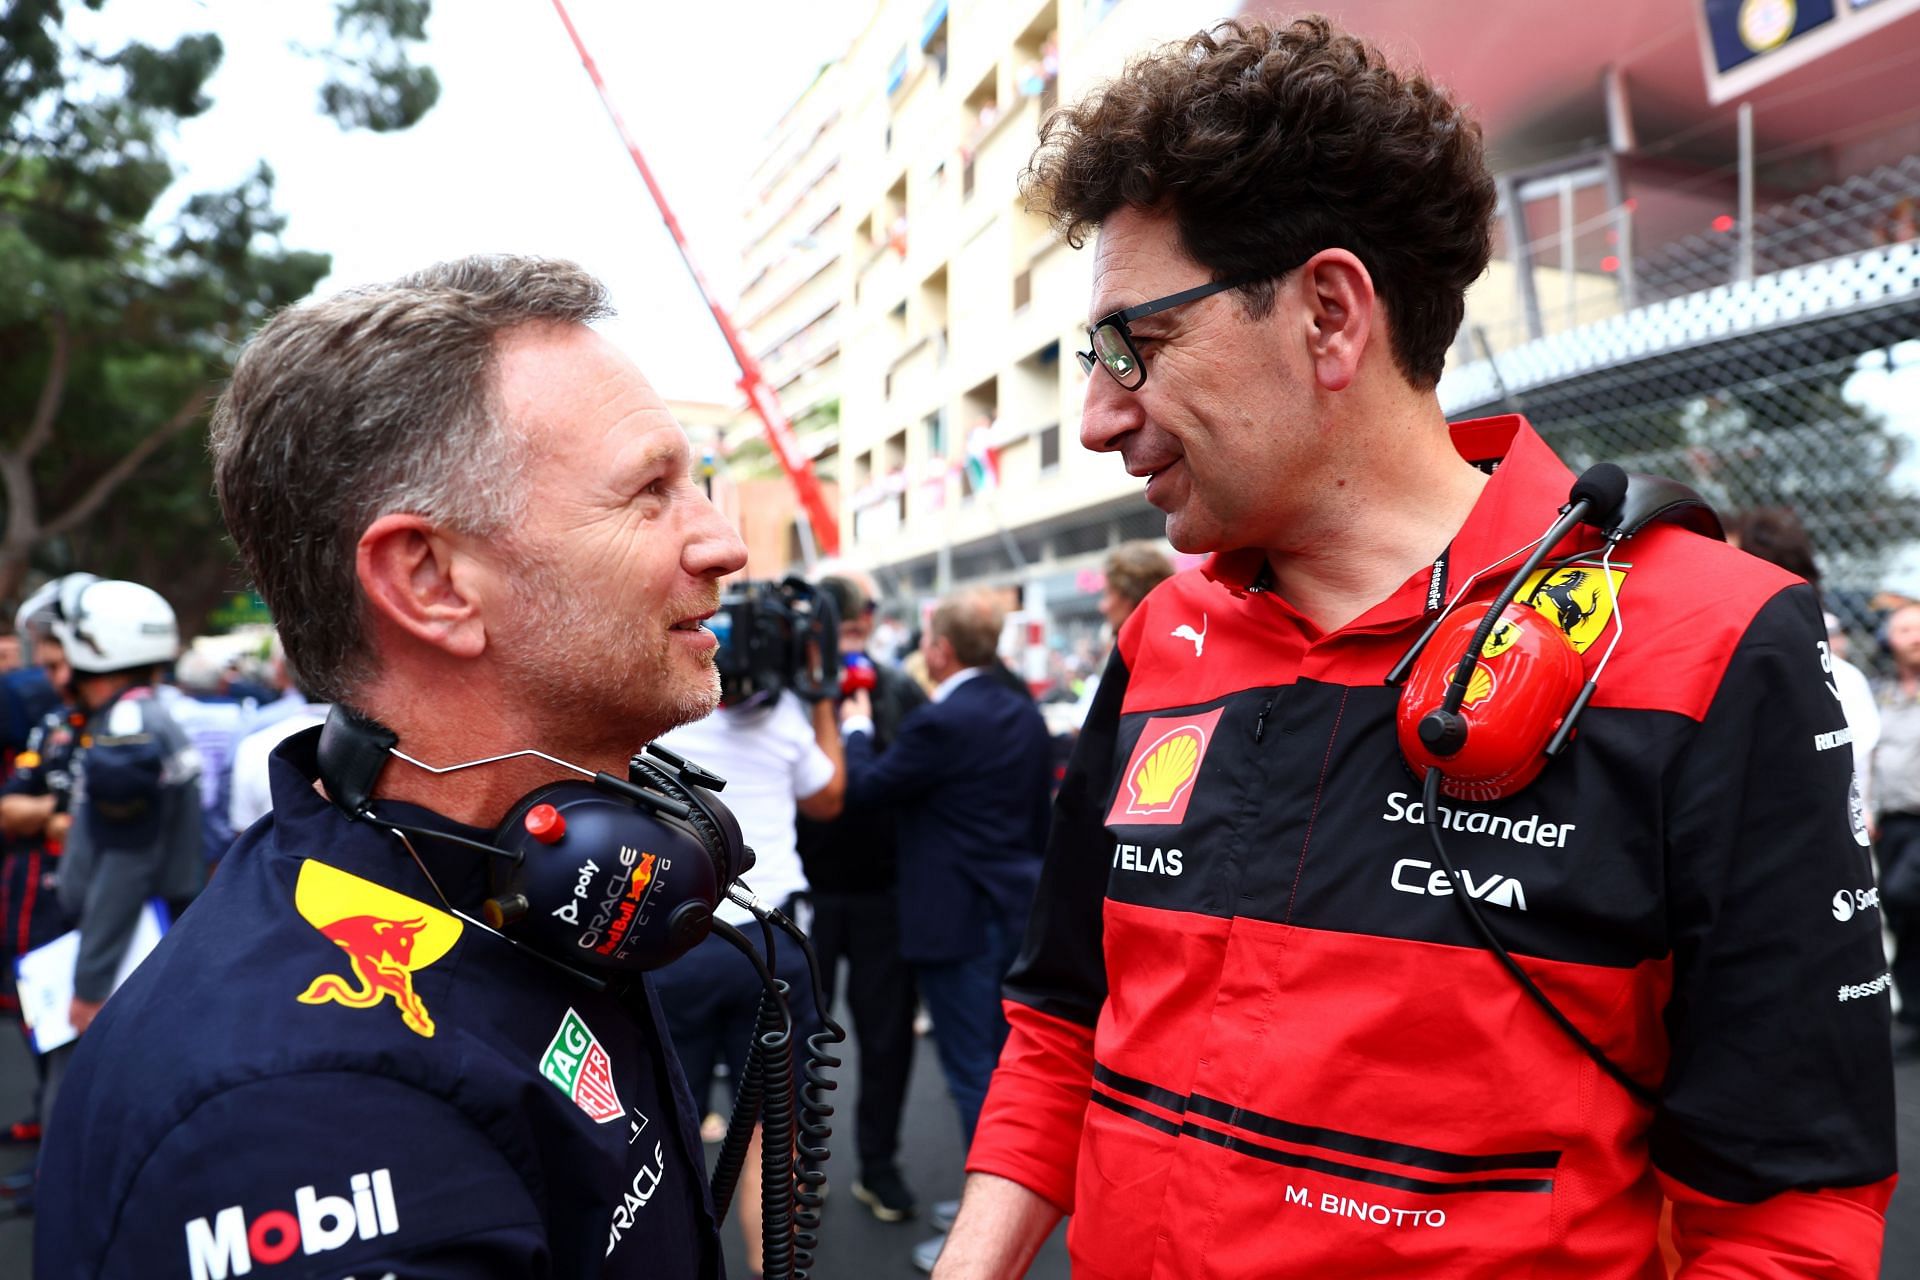 Red Bull team boss Christian Horner (left) and Ferrari team boss Mattia Binotto share a moment during the 2022 F1 Monaco GP weekend. (Photo by Mark Thompson/Getty Images)